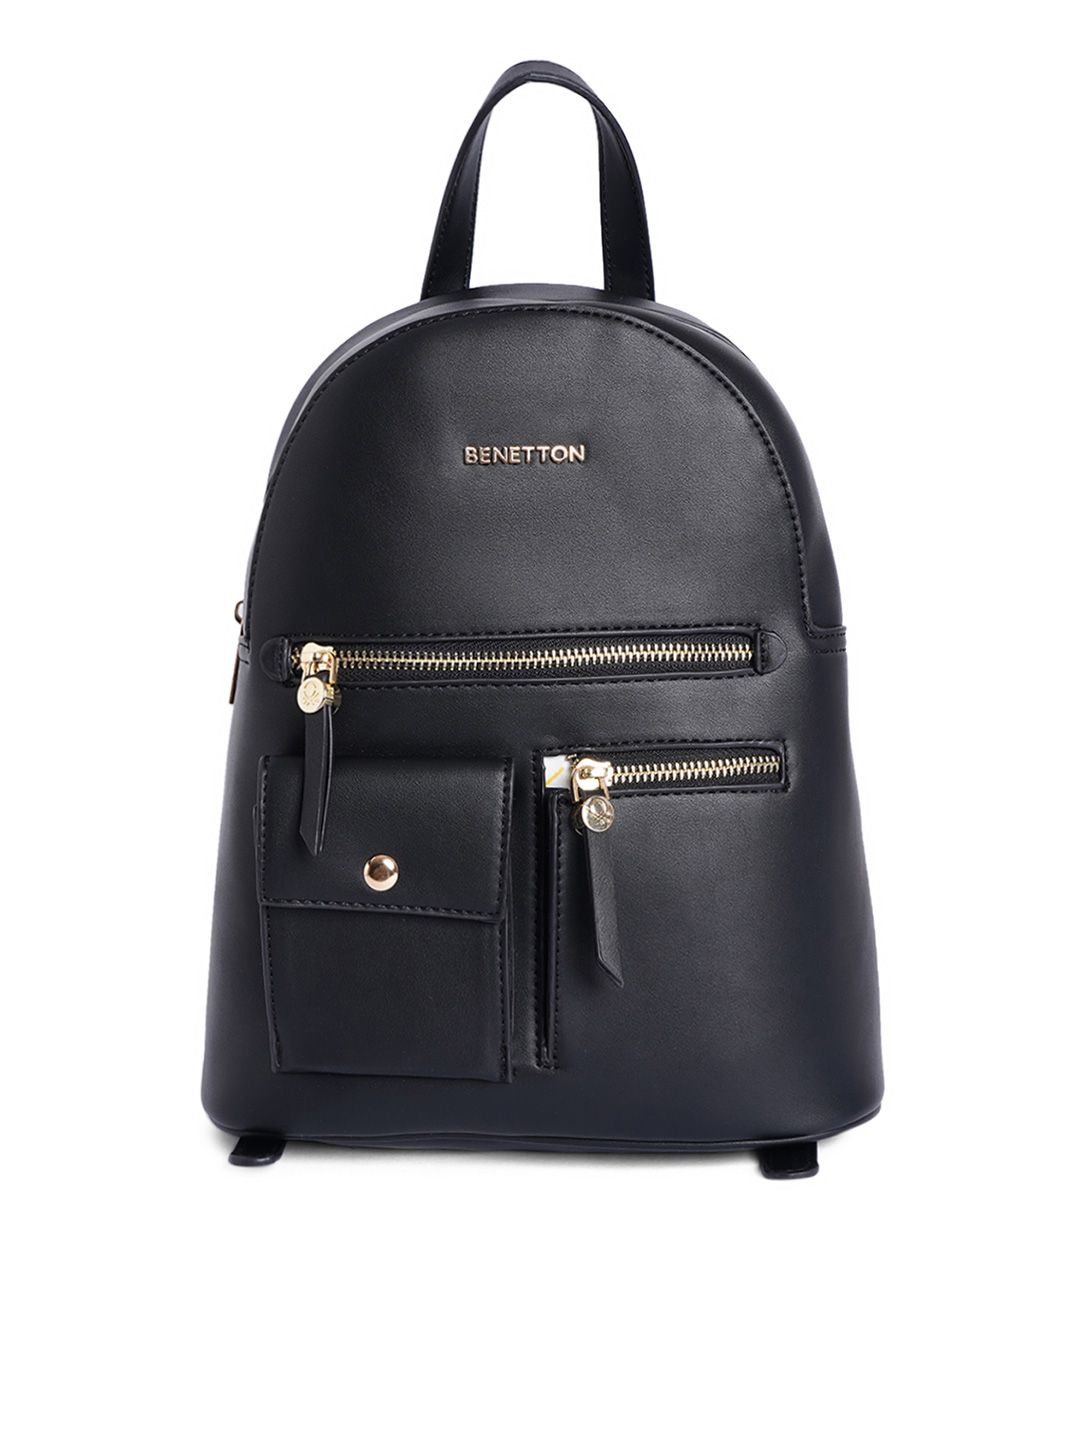 United Colors of Benetton Women Black Backpack Price in India